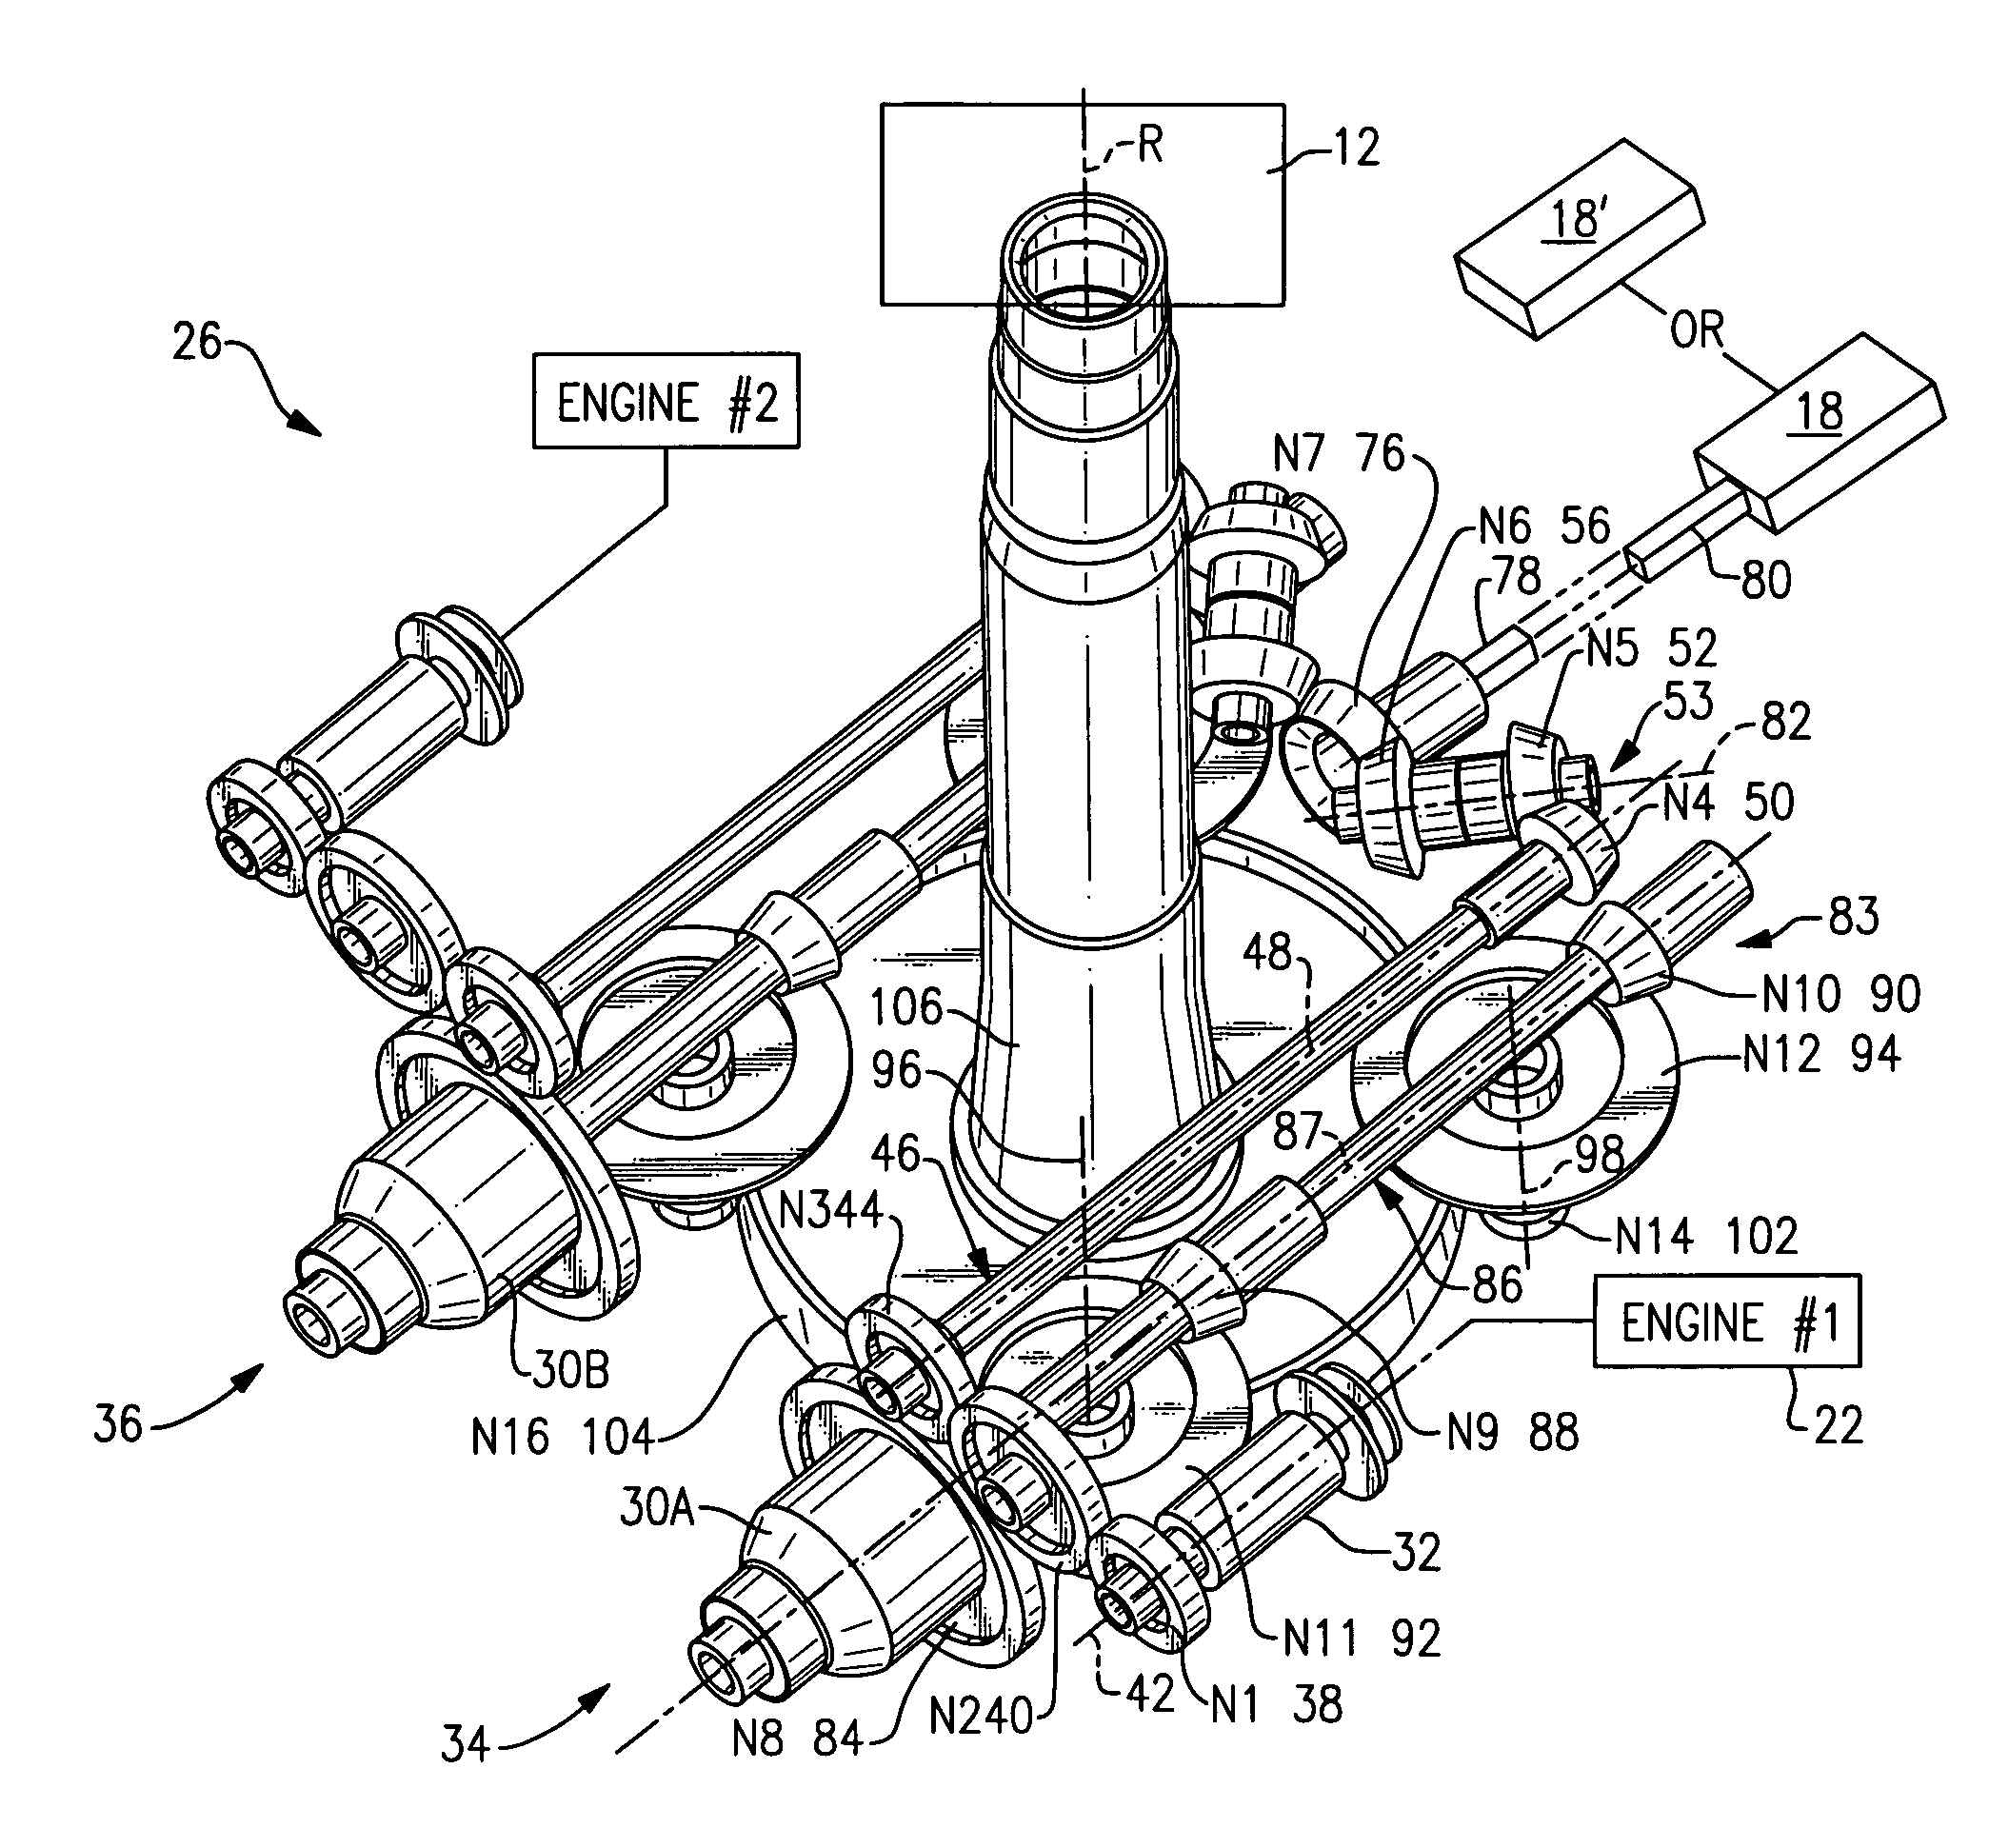 Variable speed gearbox with an independently variable speed tail rotor system for a rotary wing aircraft